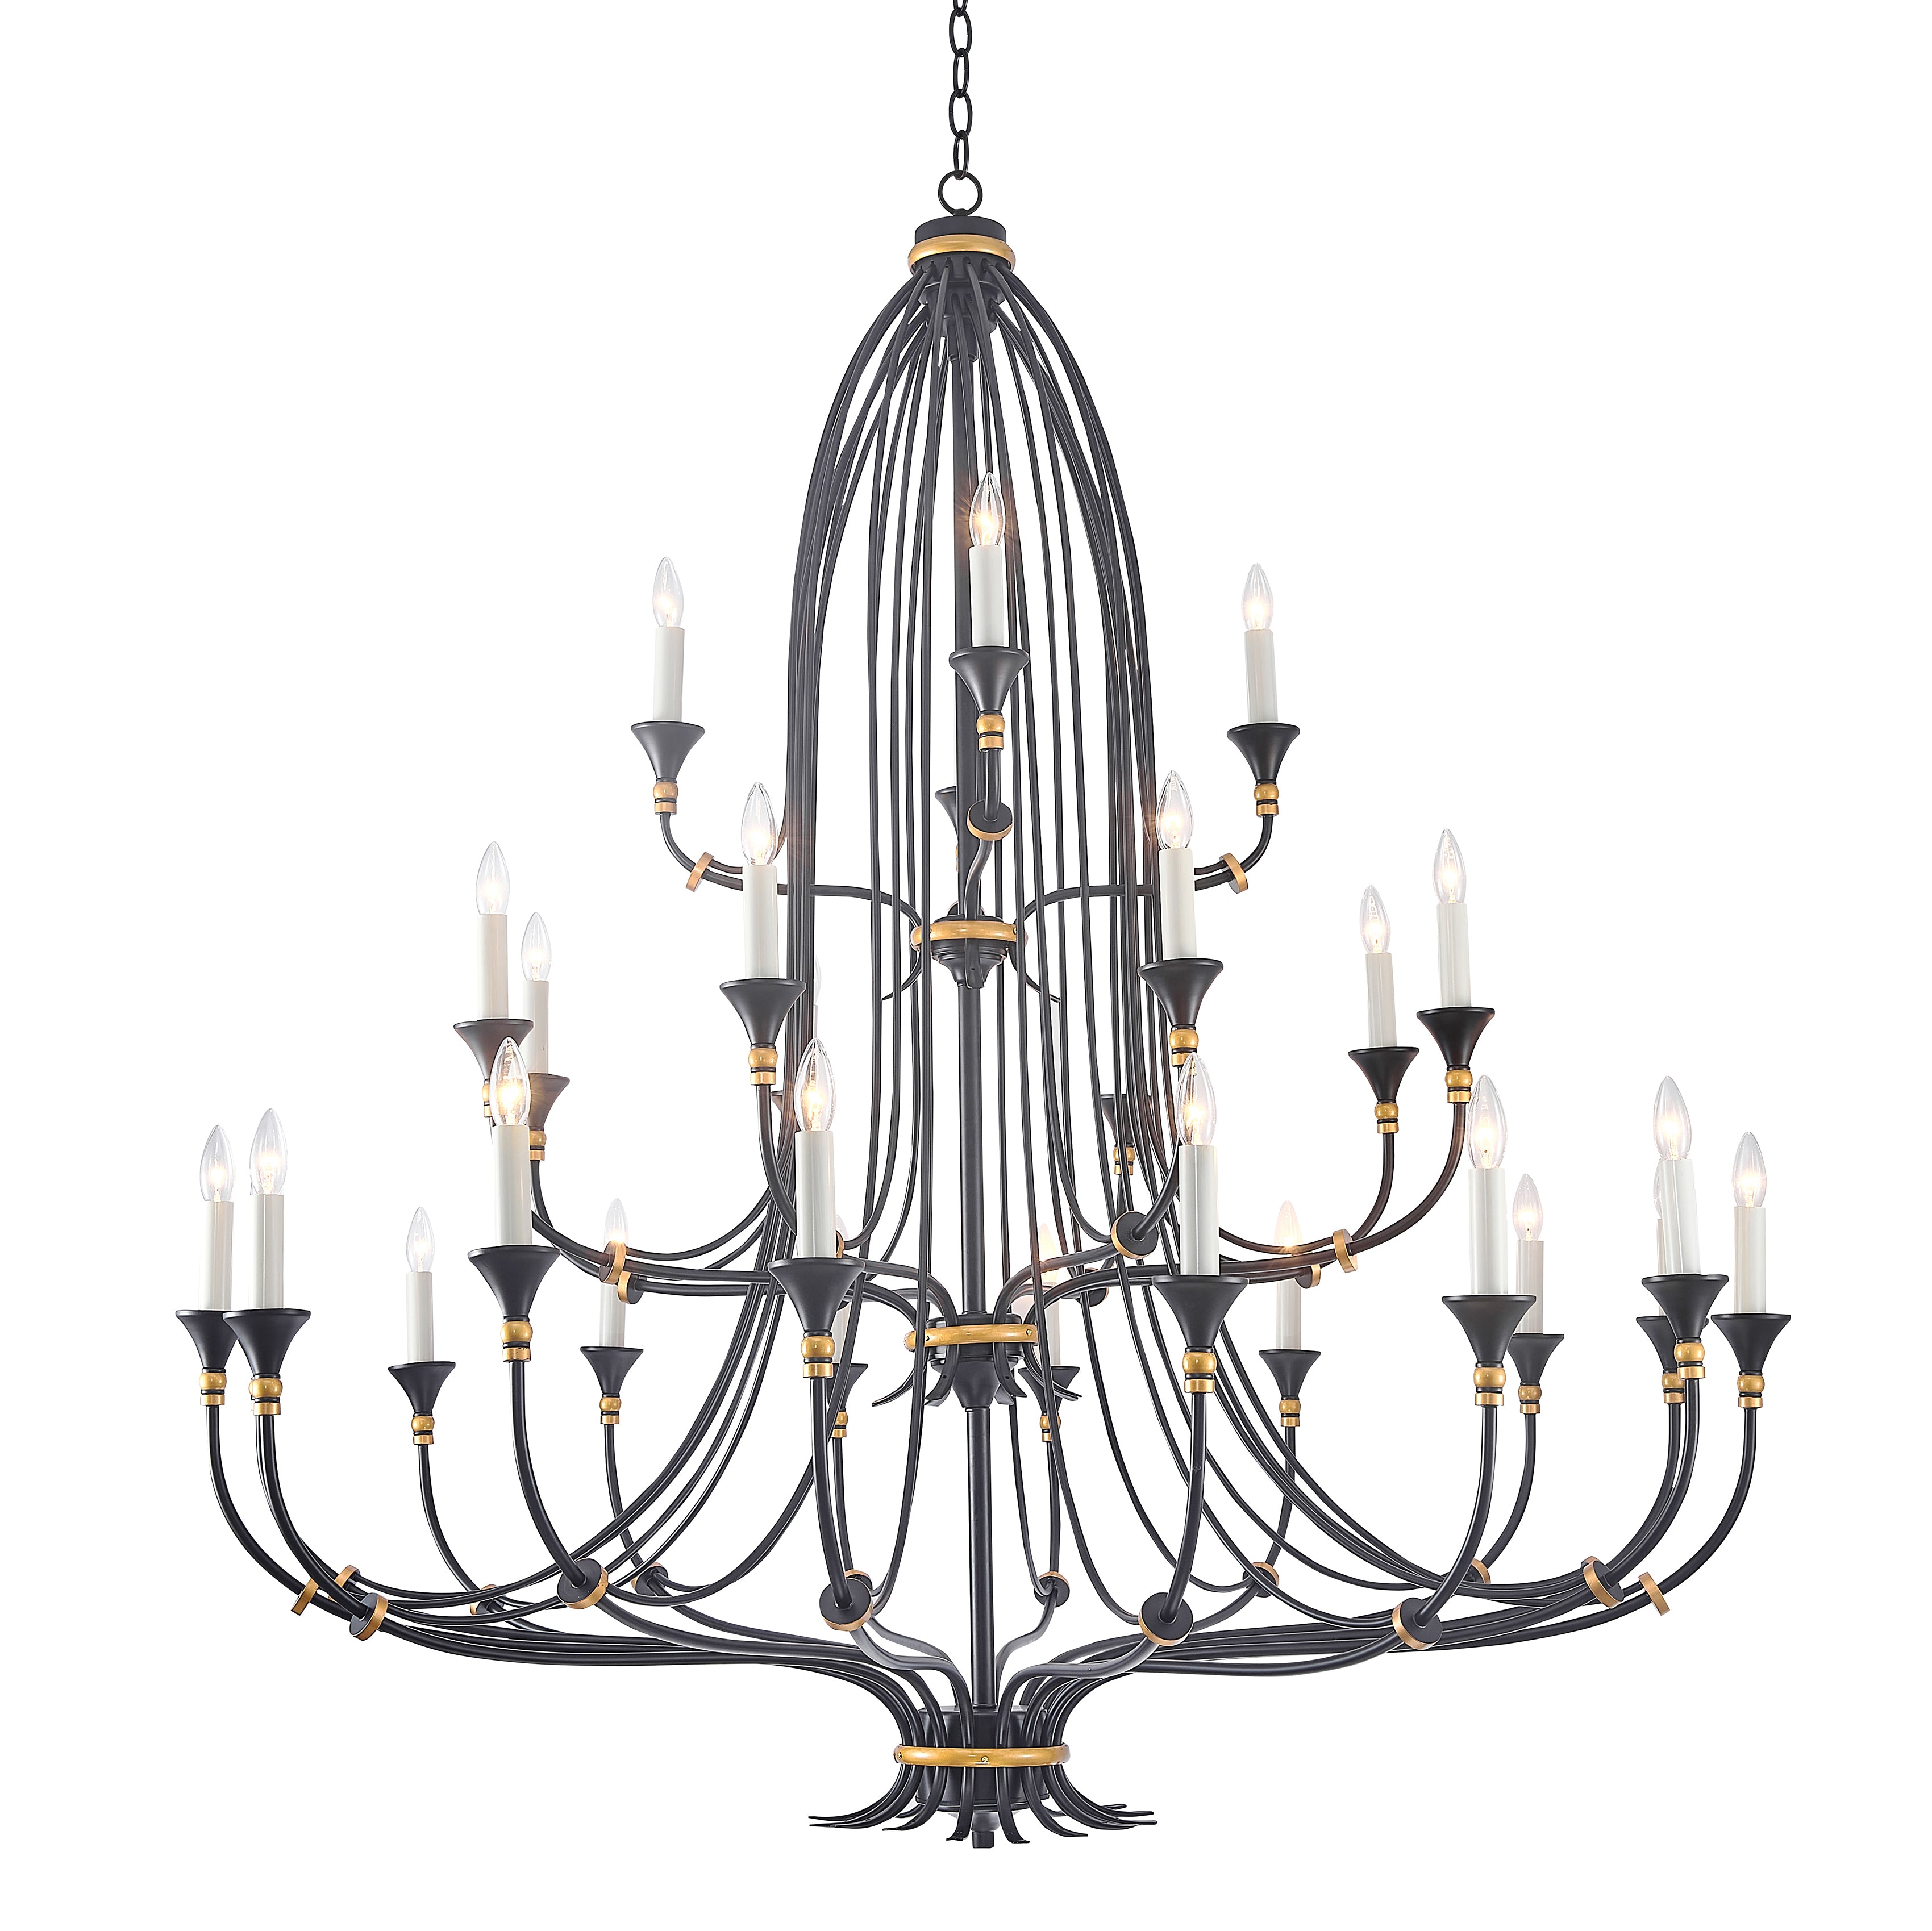 Large Foyer Cage French Country Candelabra Chandelier - Italian Concept - 